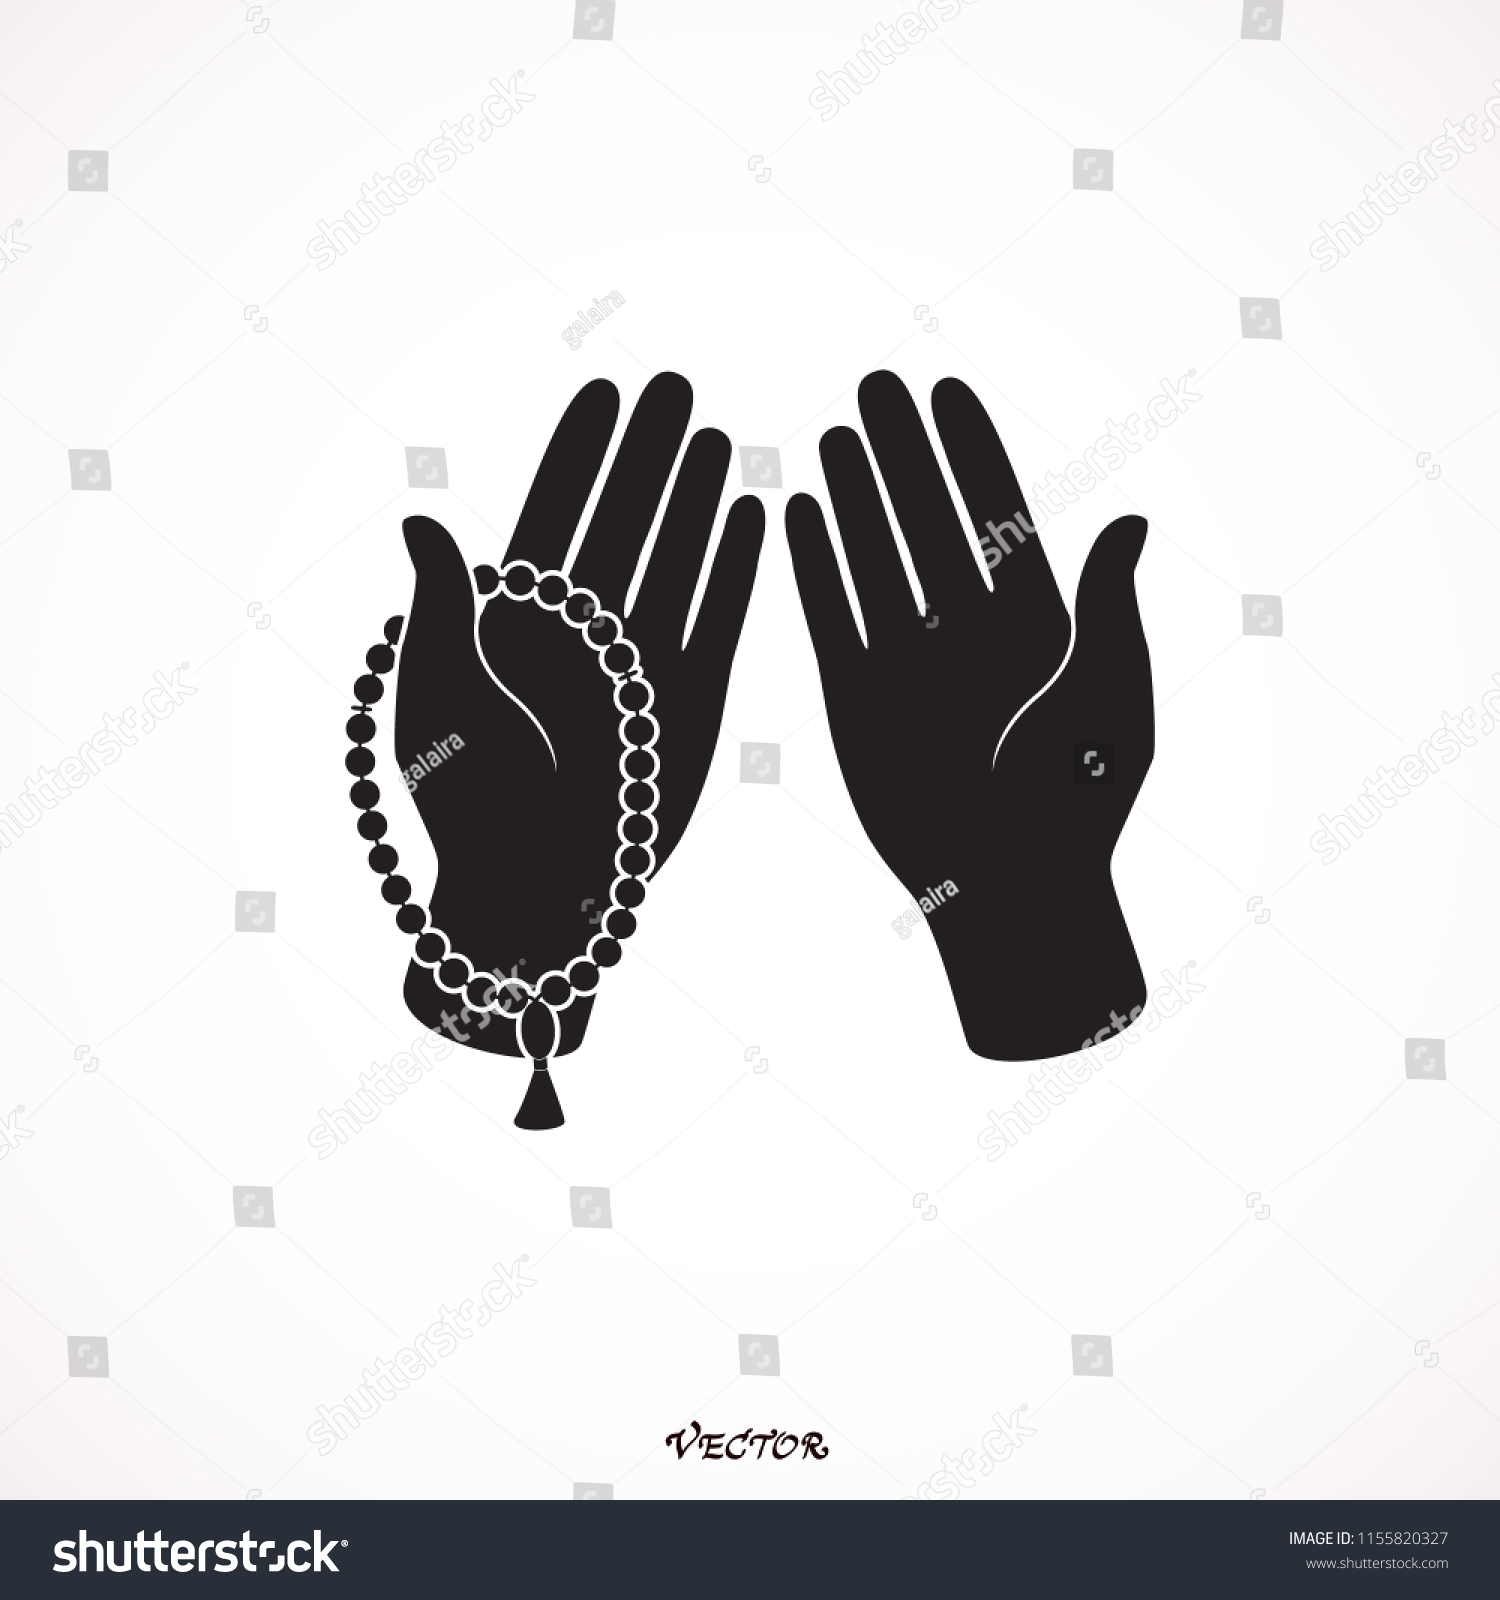 SVG of Praying human hands holding Rosary (Tasbih) in front of Mosque for Muslim community Festival of Sacrifice, Eid-Al-Adha celebration. svg